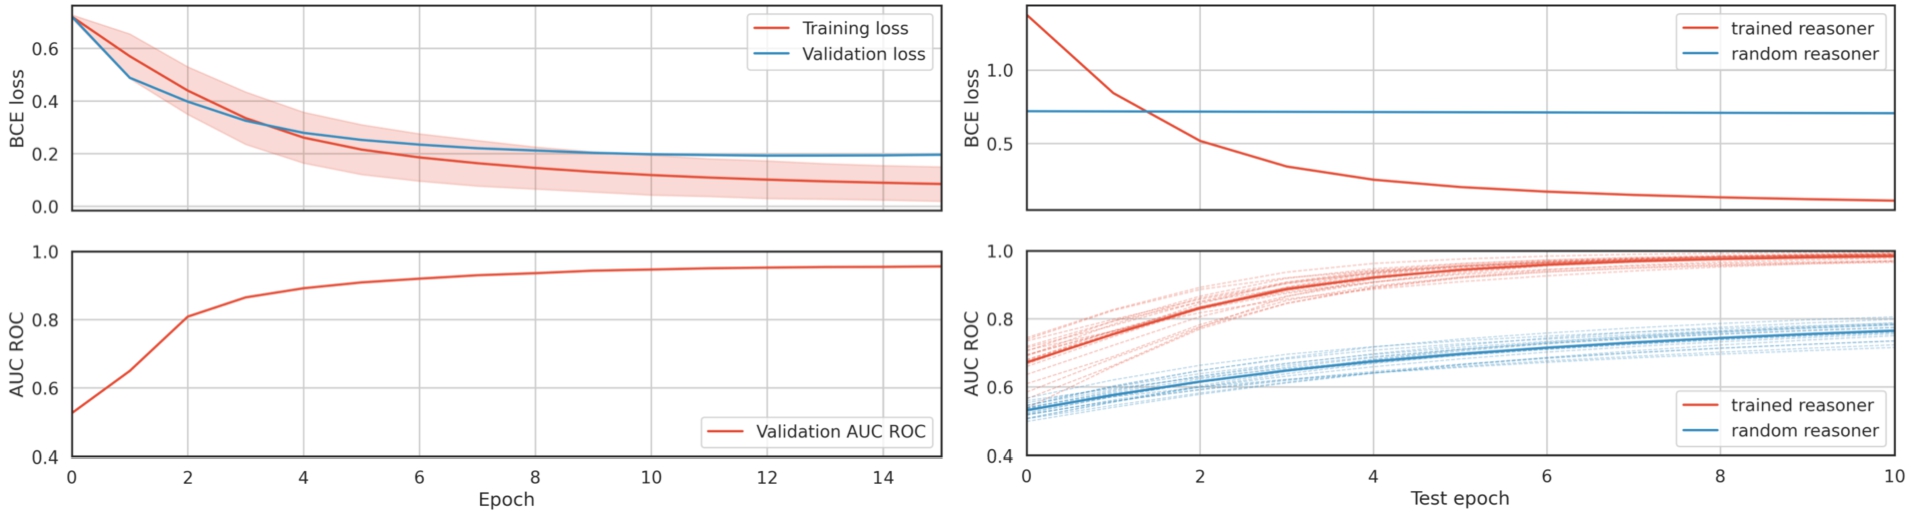 Training and test progress of the restricted reasoner. The reported training loss for each epoch is the average mini-batch loss in that epoch. We also show the standard deviation of the mini-batch loss for each epoch. In test progress, the trained reasoner is shown in red, while the random reasoner is shown in blue. The reasoner was not trained during epoch 0 of training and testing – during epoch 0 we only compute the initial loss and metric values. Dashed curves show the AUC-ROC for each KB in the test set, while the thicker blue and red curves are the averaged AUC-ROC across KBs in the test set. Note that the random reasoner loss actually decreases, but at a very slow rate.